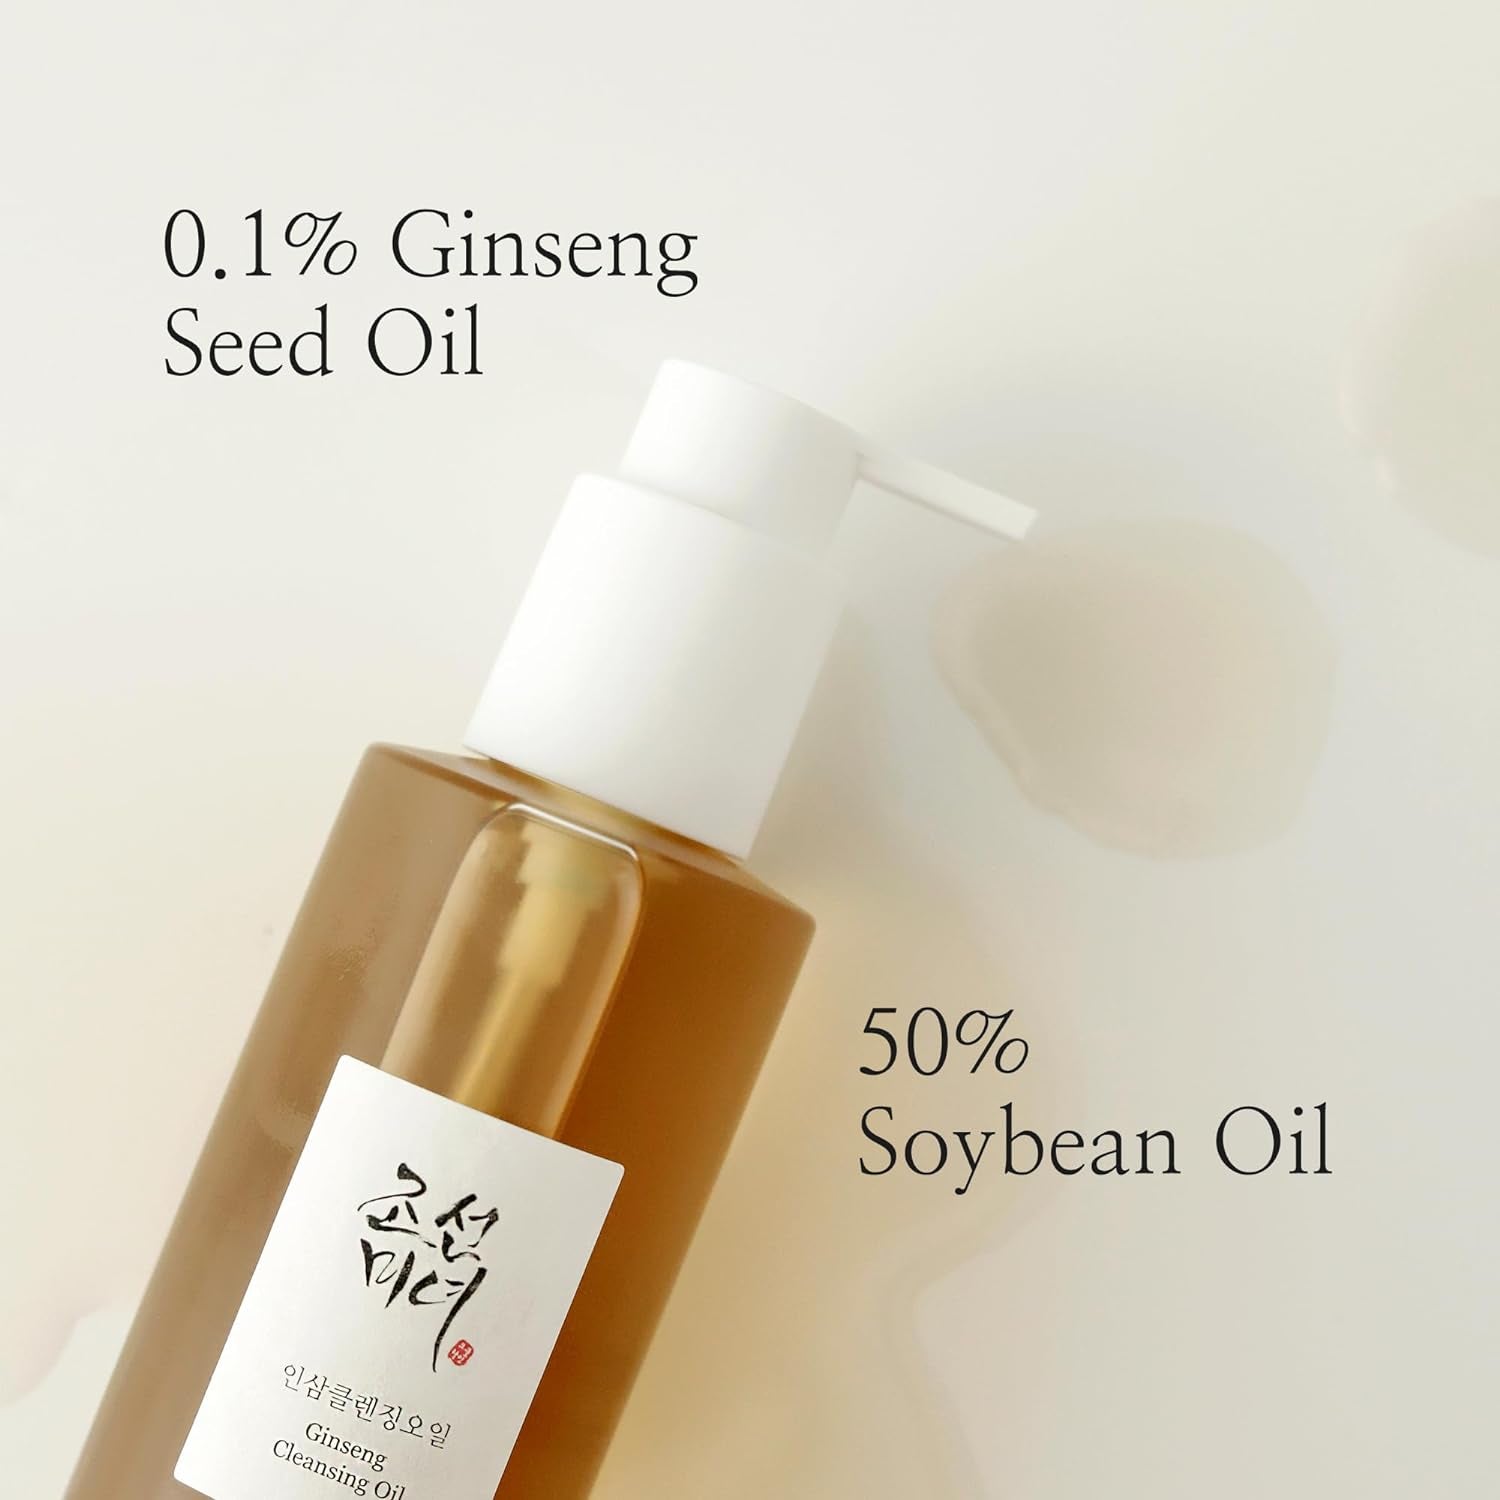 Beauty of Joseon Ginseng Cleansing Oil Waterproof Makeup Remover for Sensitive, Acne-Prone Facial Skin. Korean Skin Care for Men and Women, 210Ml, 7.1 Fl.Oz